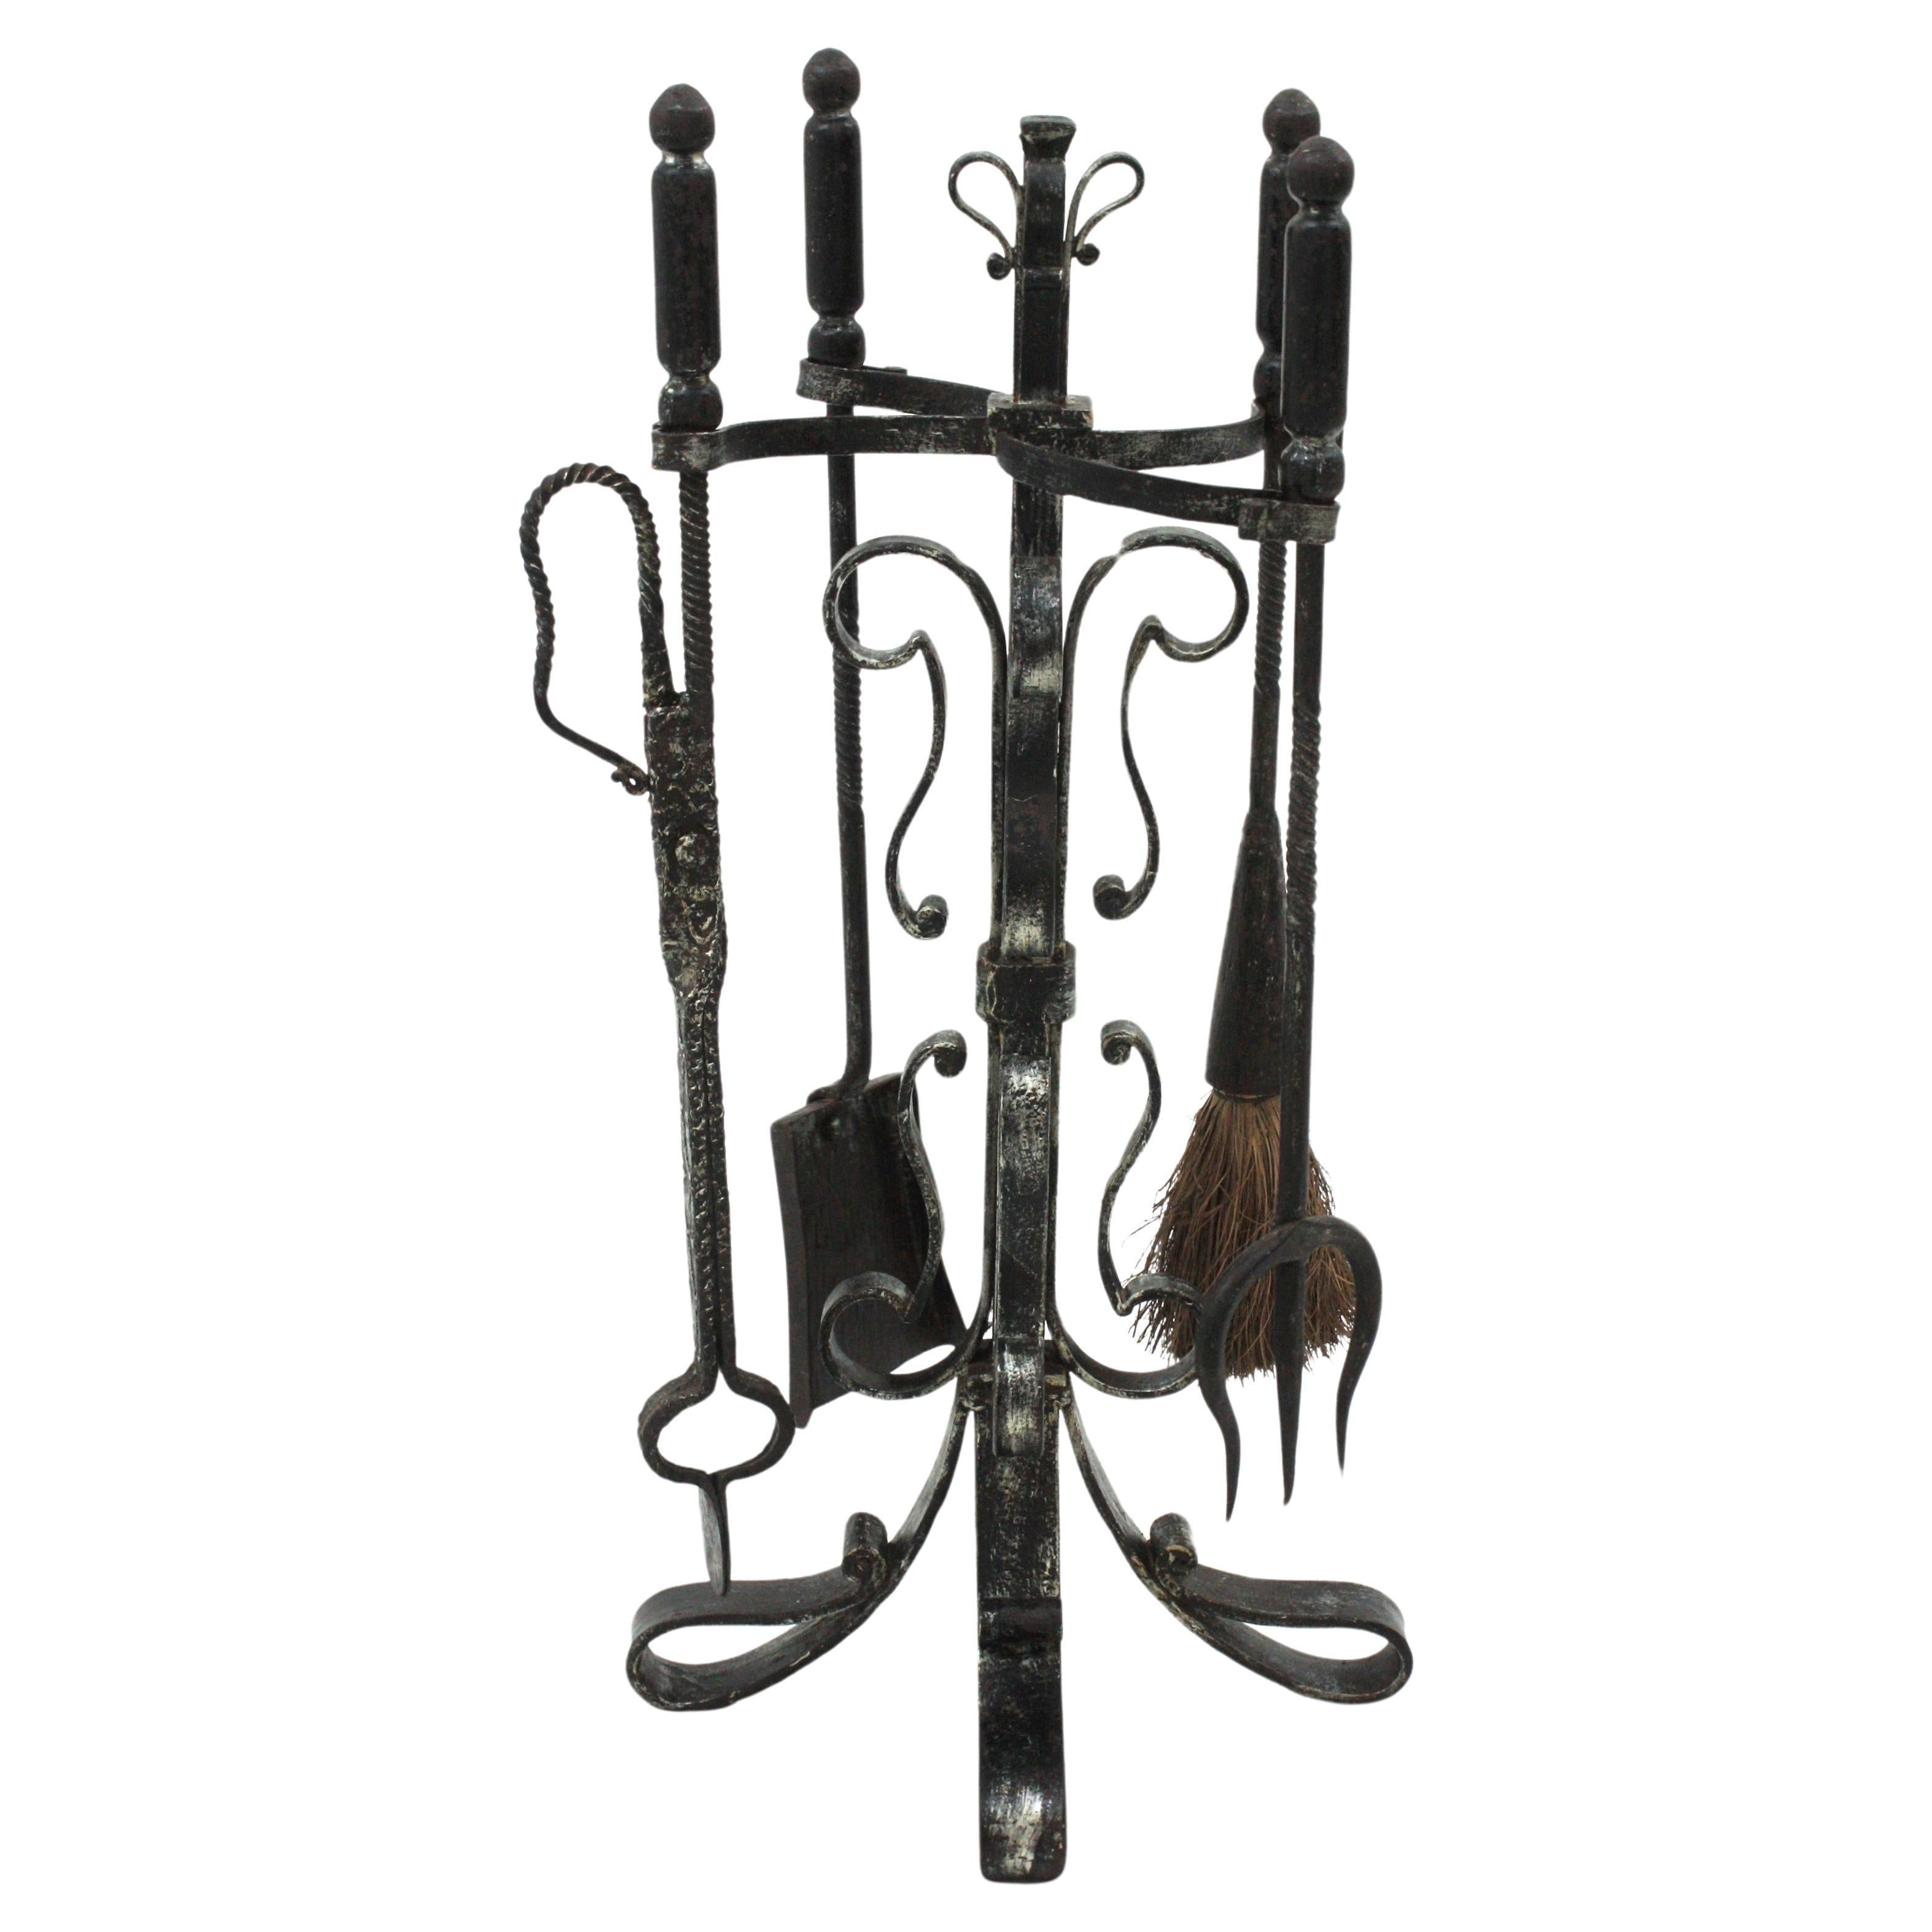 Spanish Brutalist Fireplace Tool Set Stand in Wrought Iron and Scroll Loop Motif